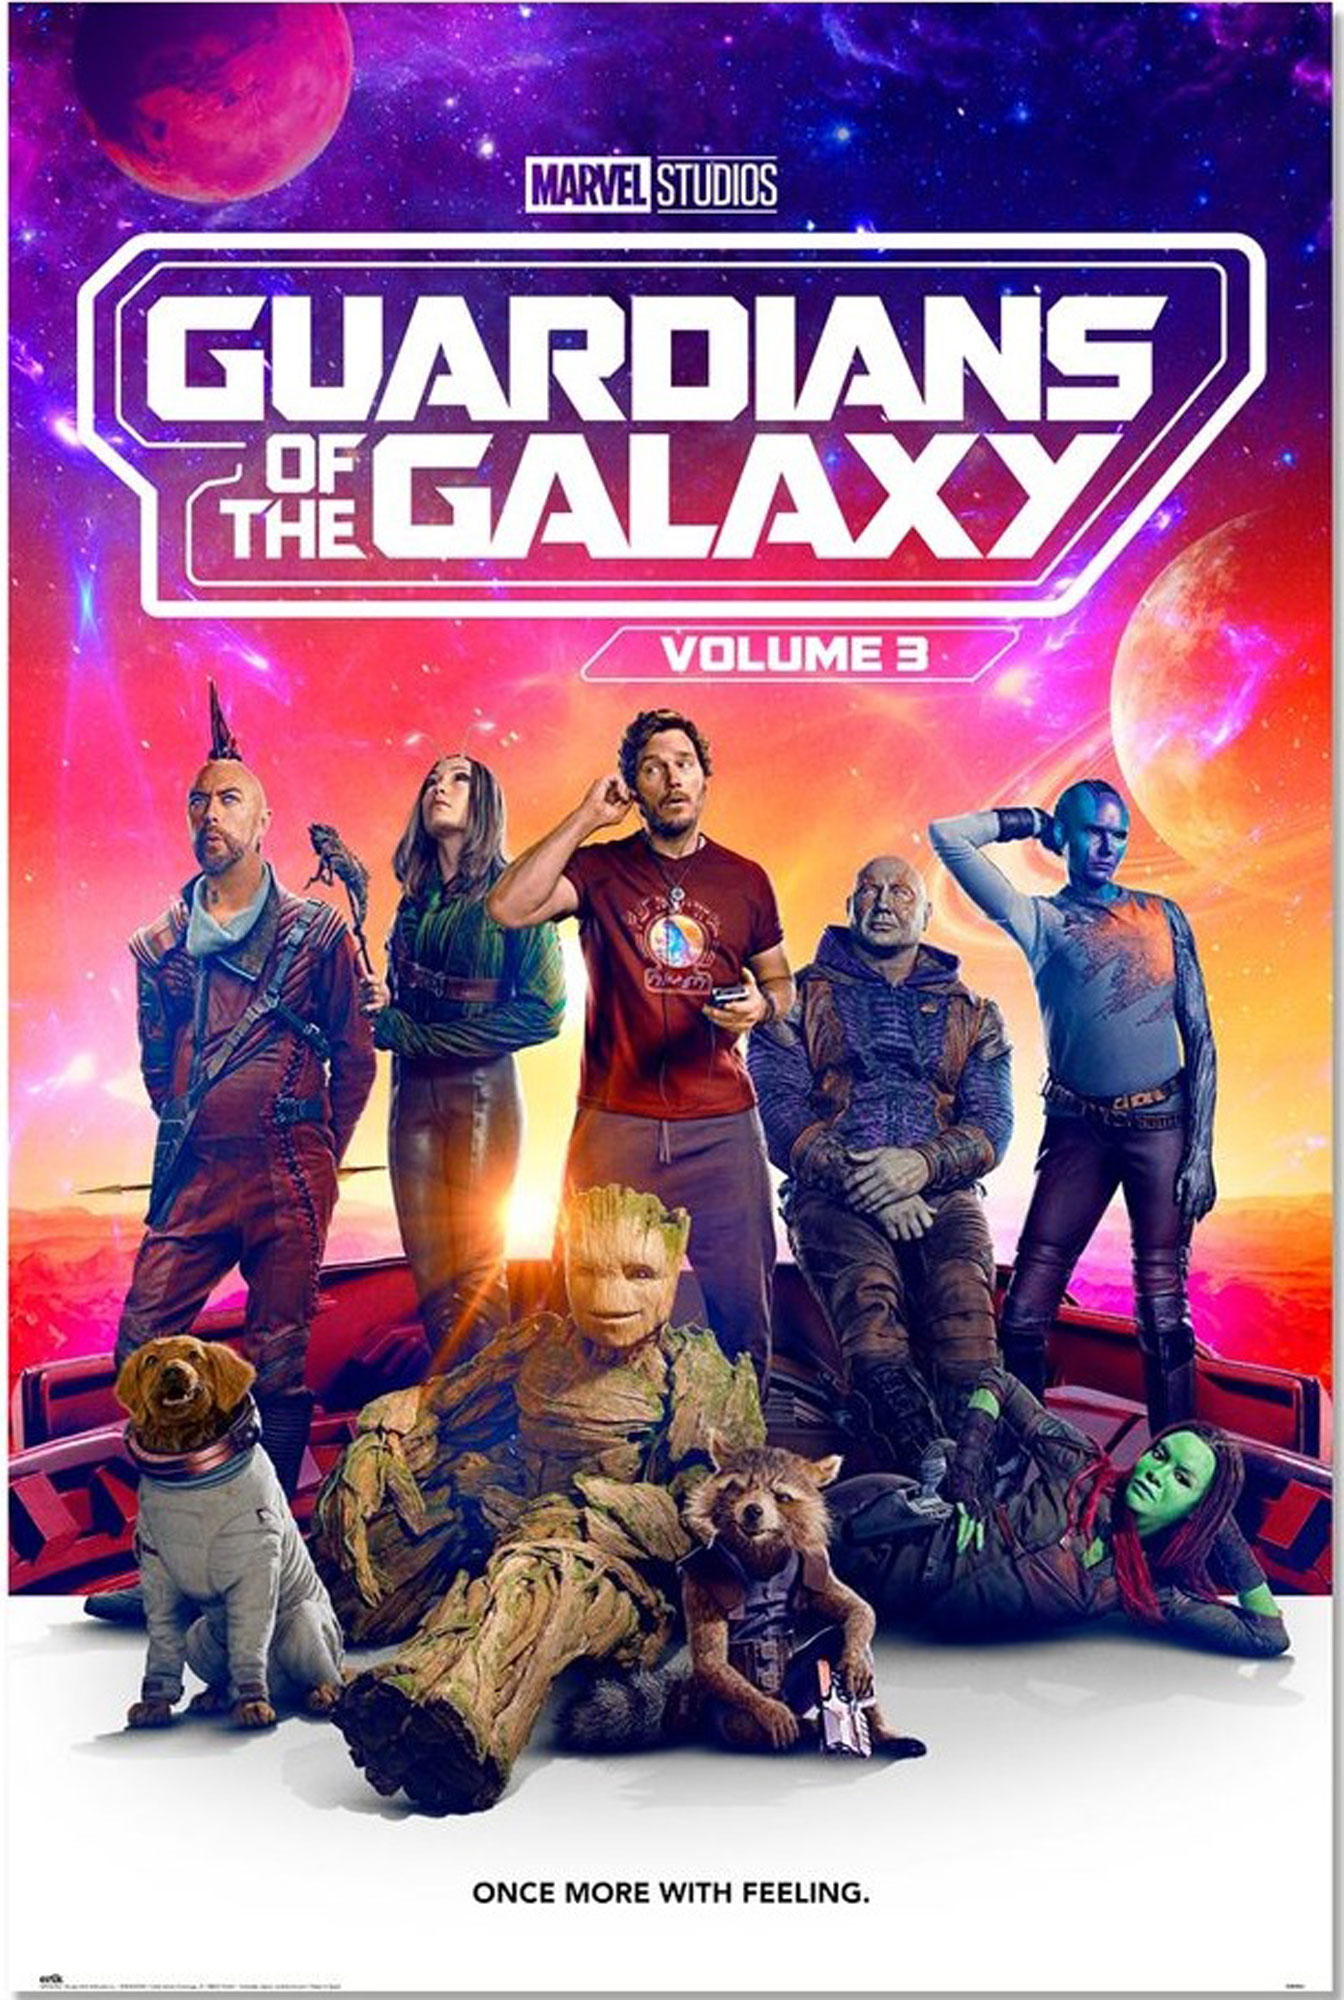 Guardians of the 3 - - Galaxy once more